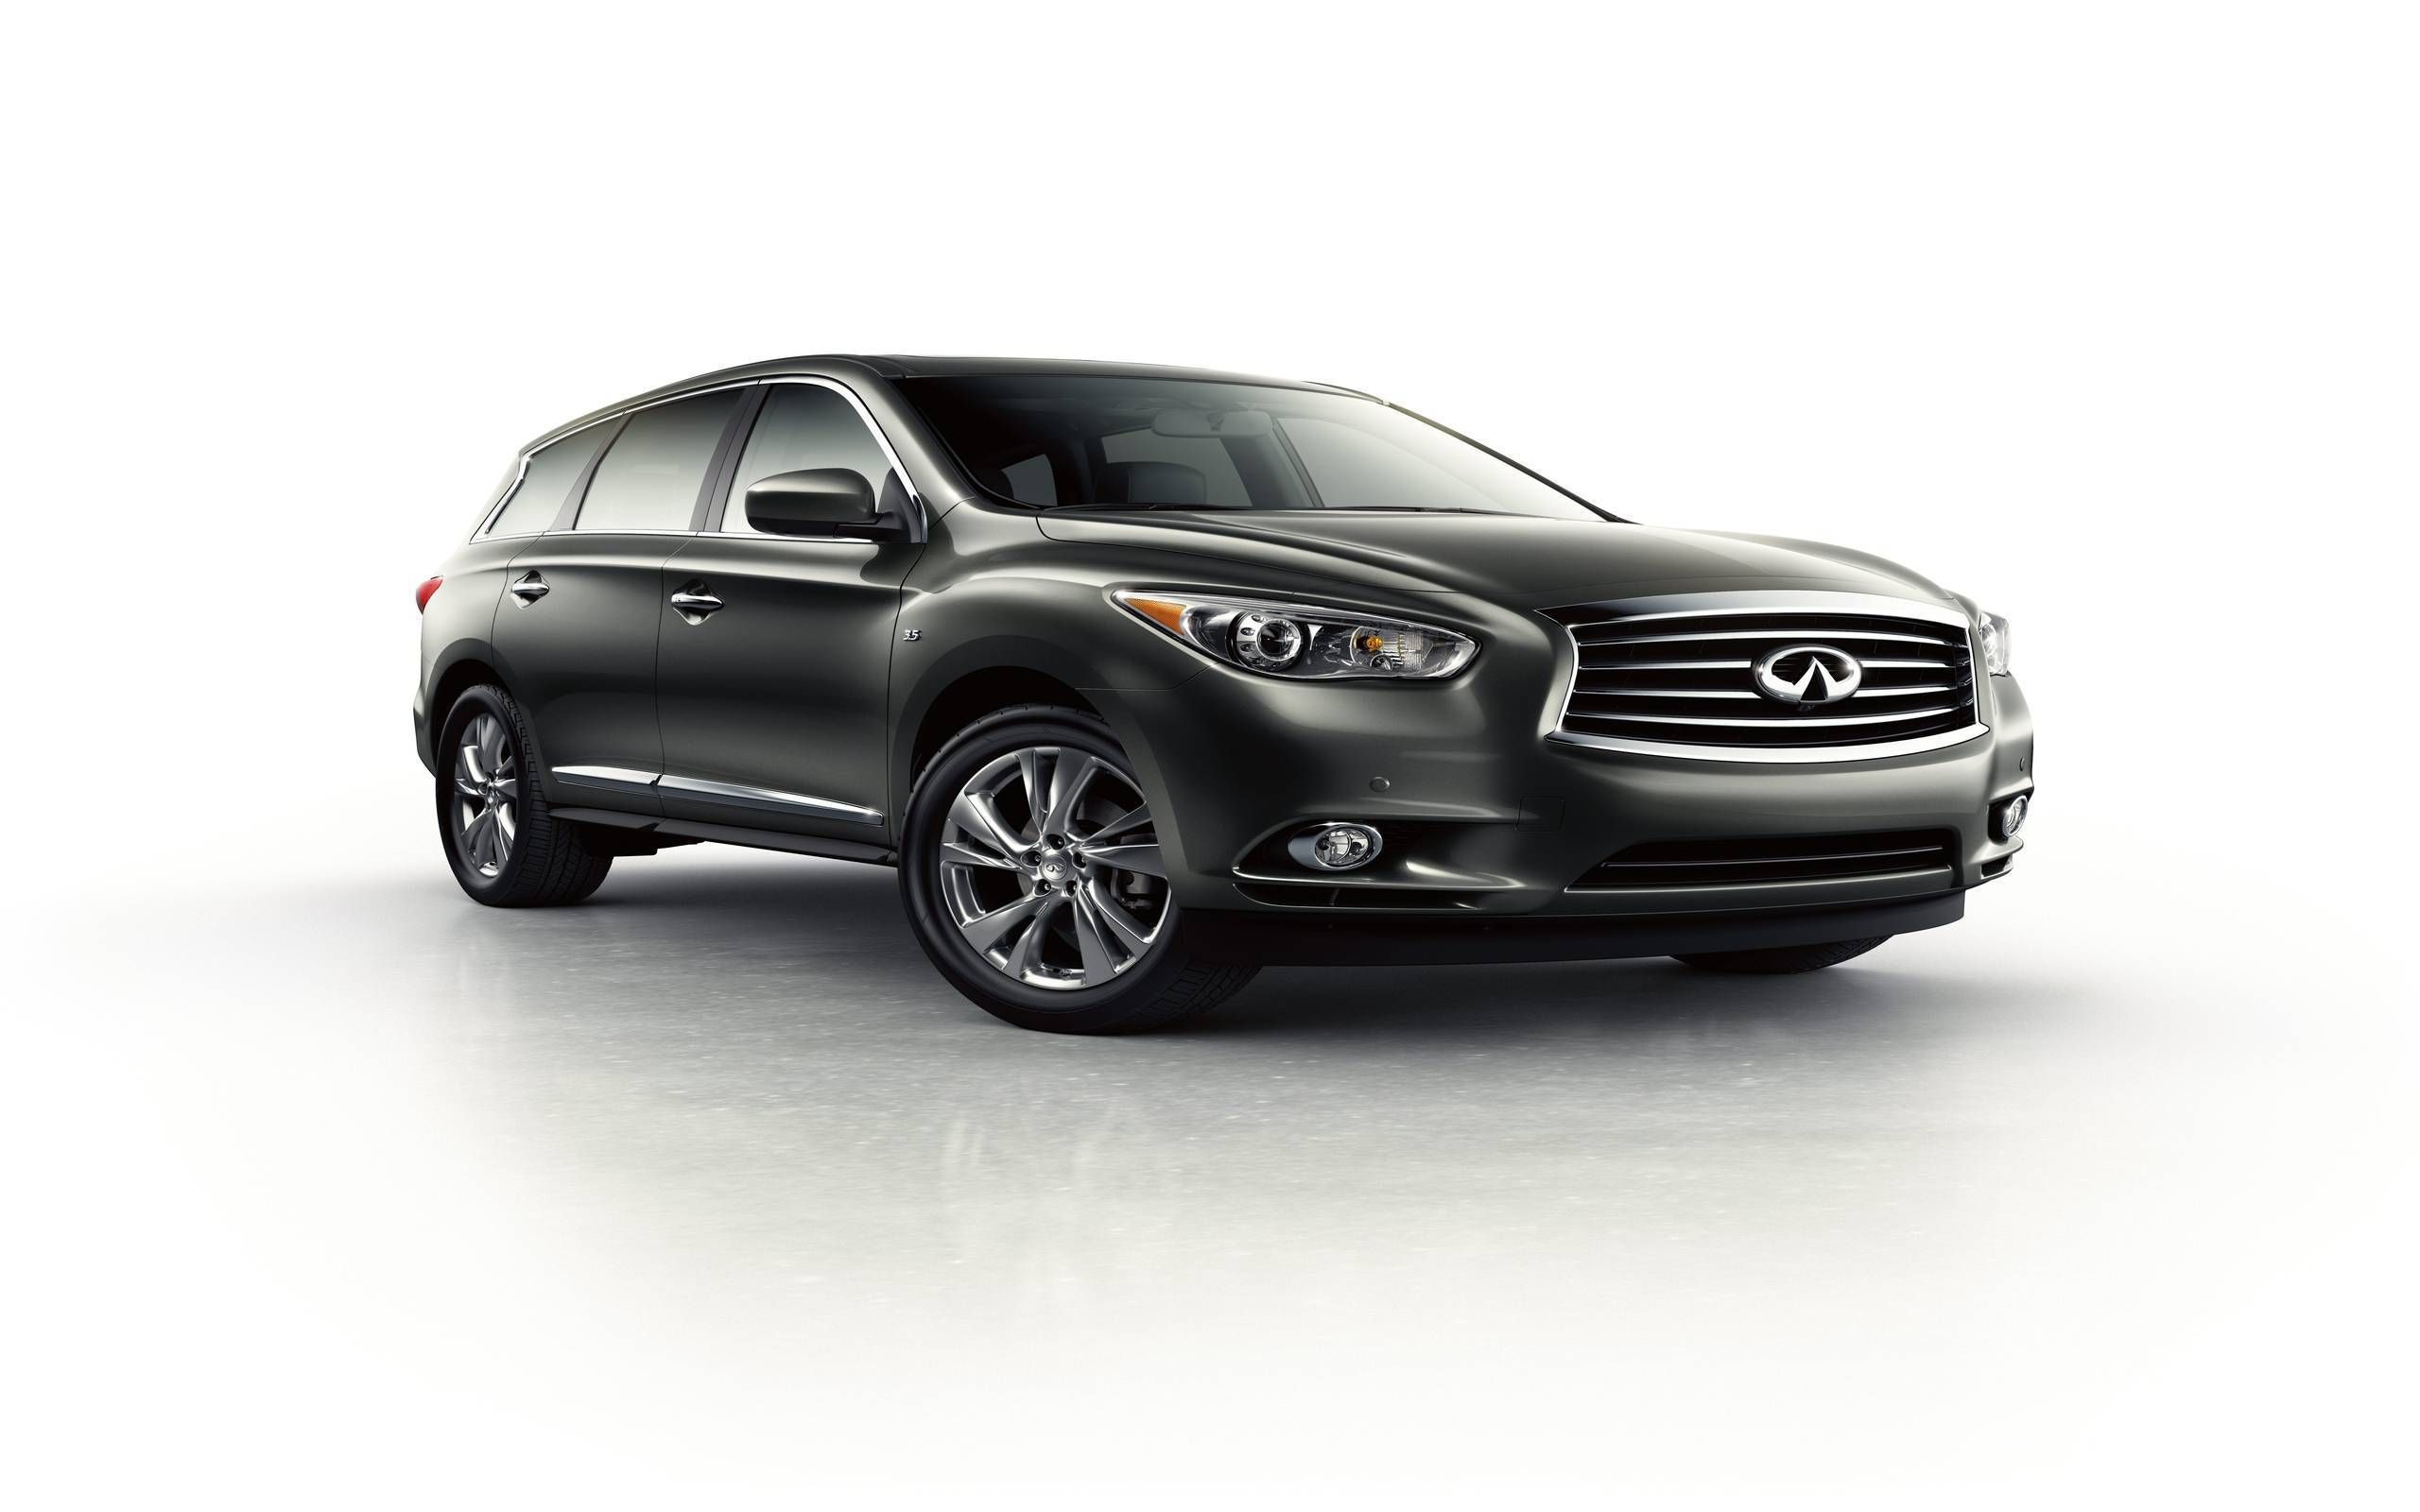 2015 Infiniti QX60 review notes: The car remains the same